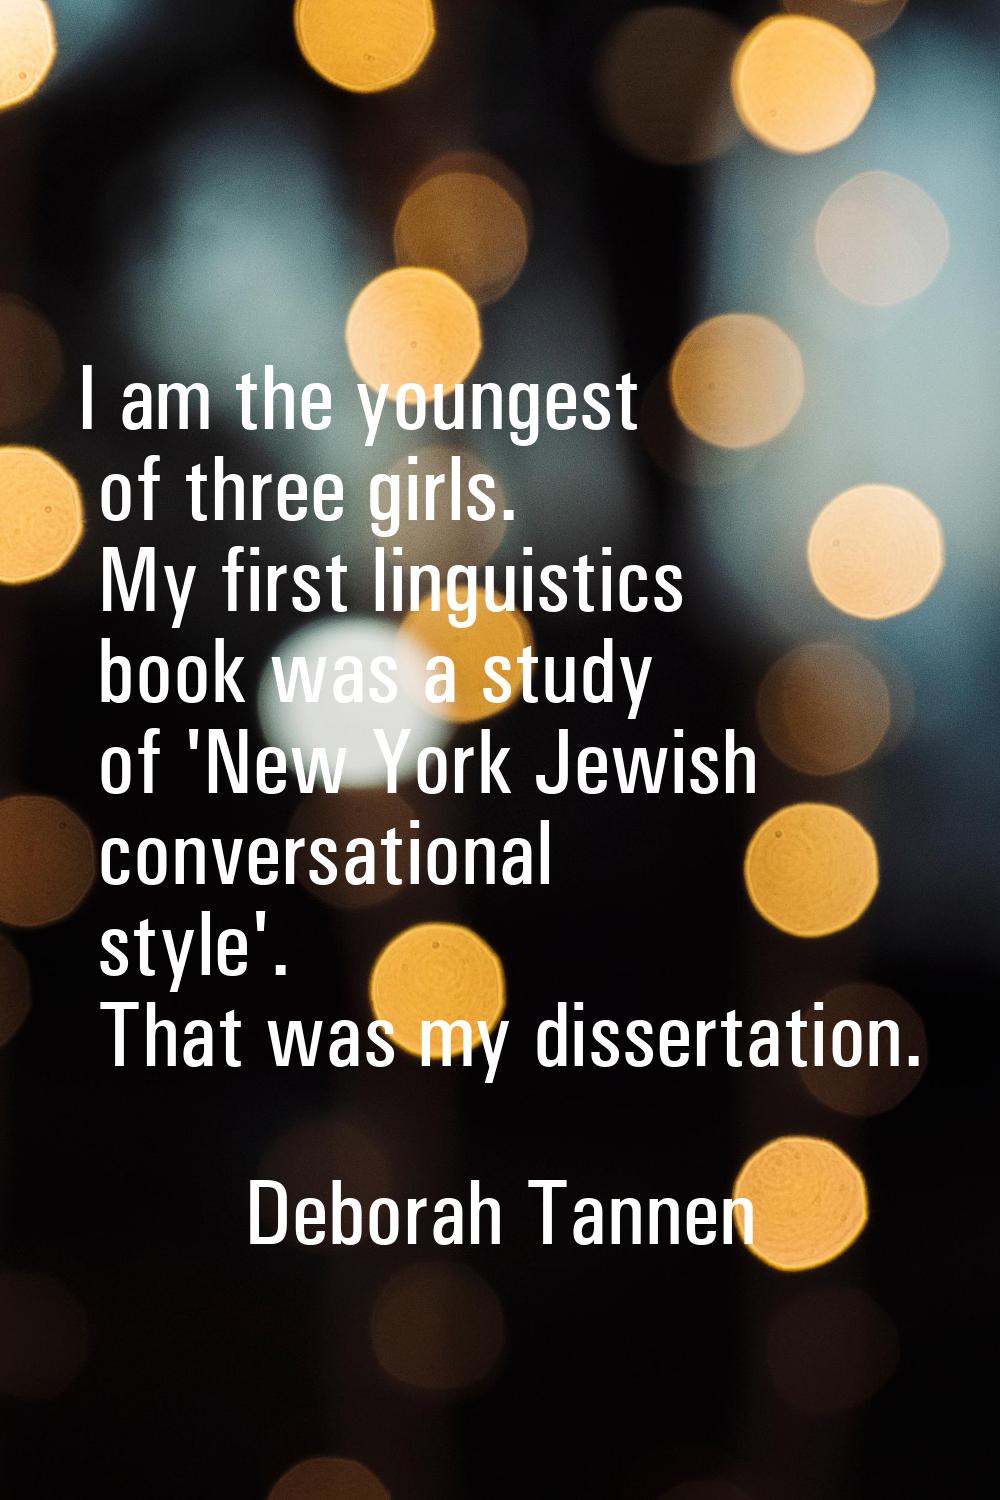 I am the youngest of three girls. My first linguistics book was a study of 'New York Jewish convers